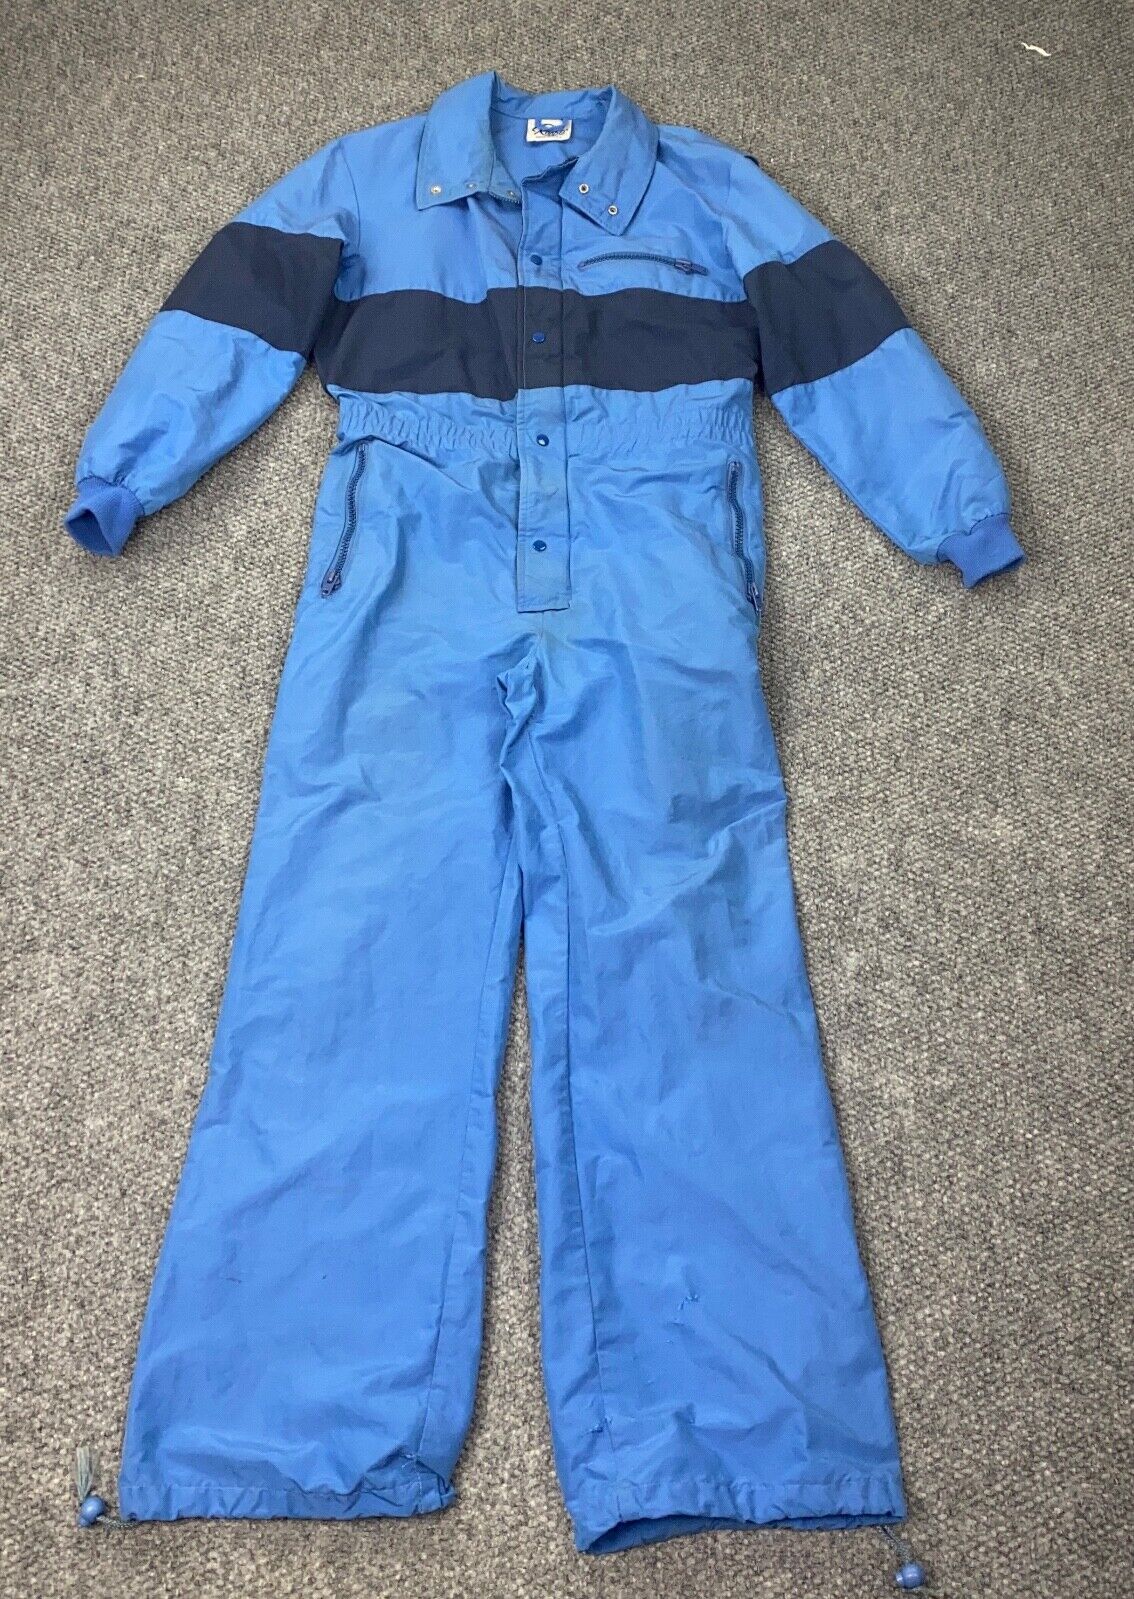 Vintage Roffe Snowsuit Mens Small Blue Made in USA 70s 80s Lightweight One Piece